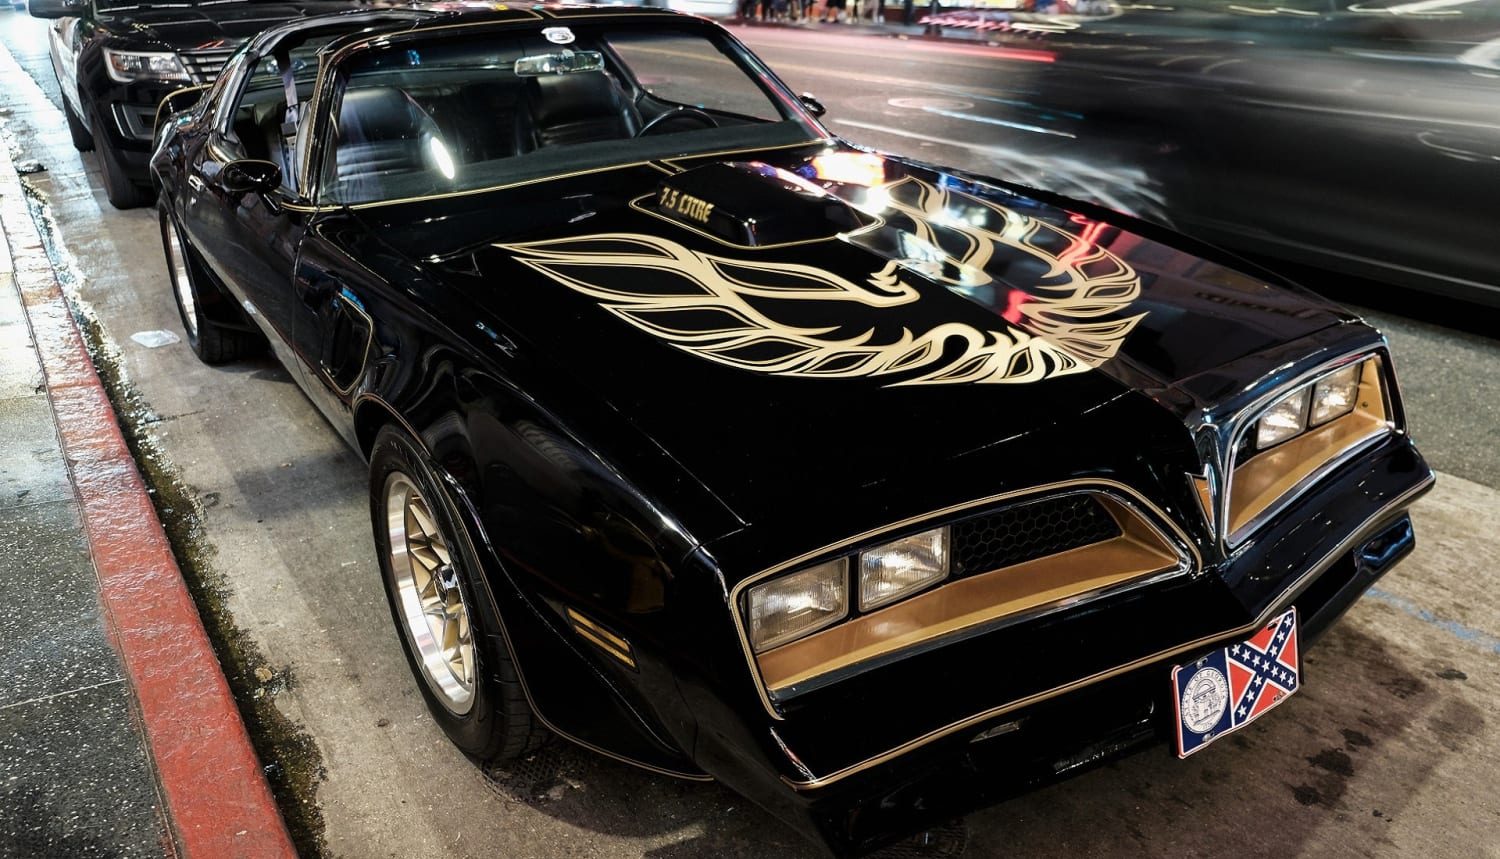 Burt Reynolds' Own Smokey and the Bandit Pontiac Trans Am Sells for $317,500 at Auction